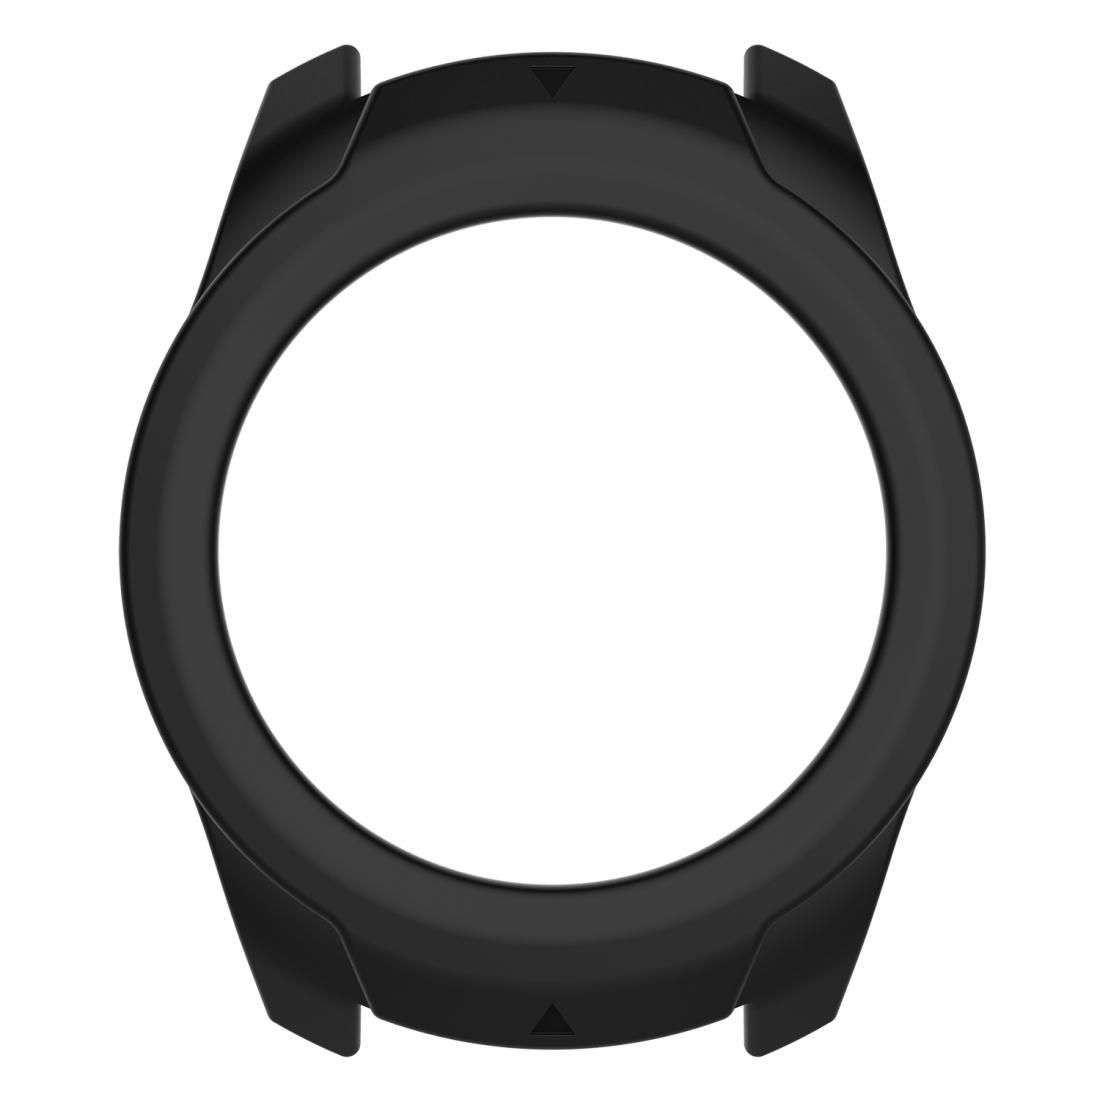 For Ticwatch Pro 2020 / Ticwatch Pro Universal Silicone Protective Case (Black)